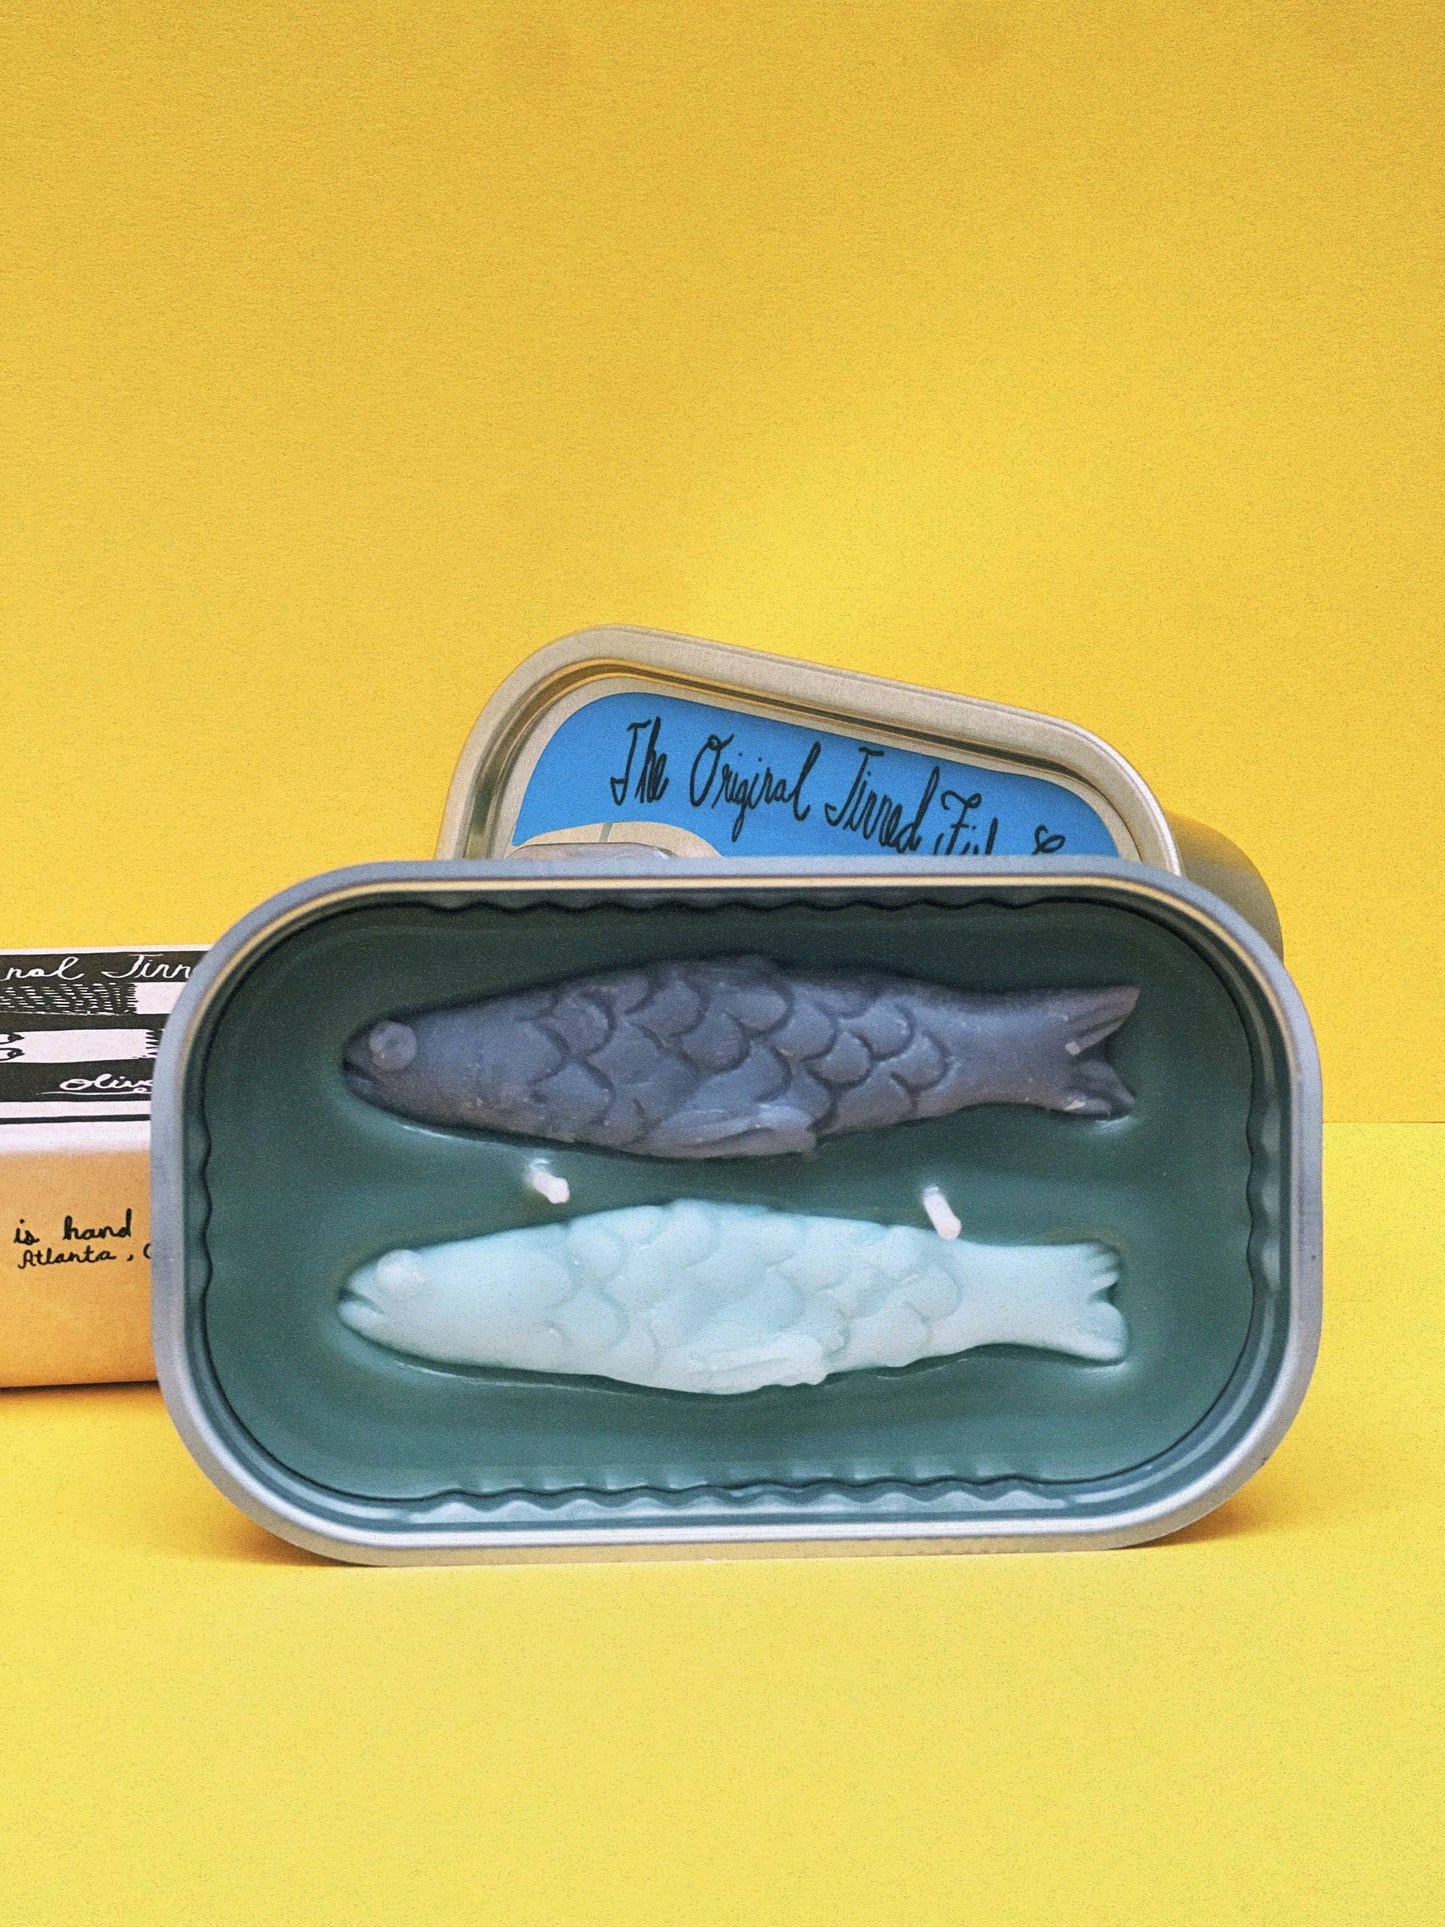 Olive Oil and Sea Salt Tinned Fish Candle